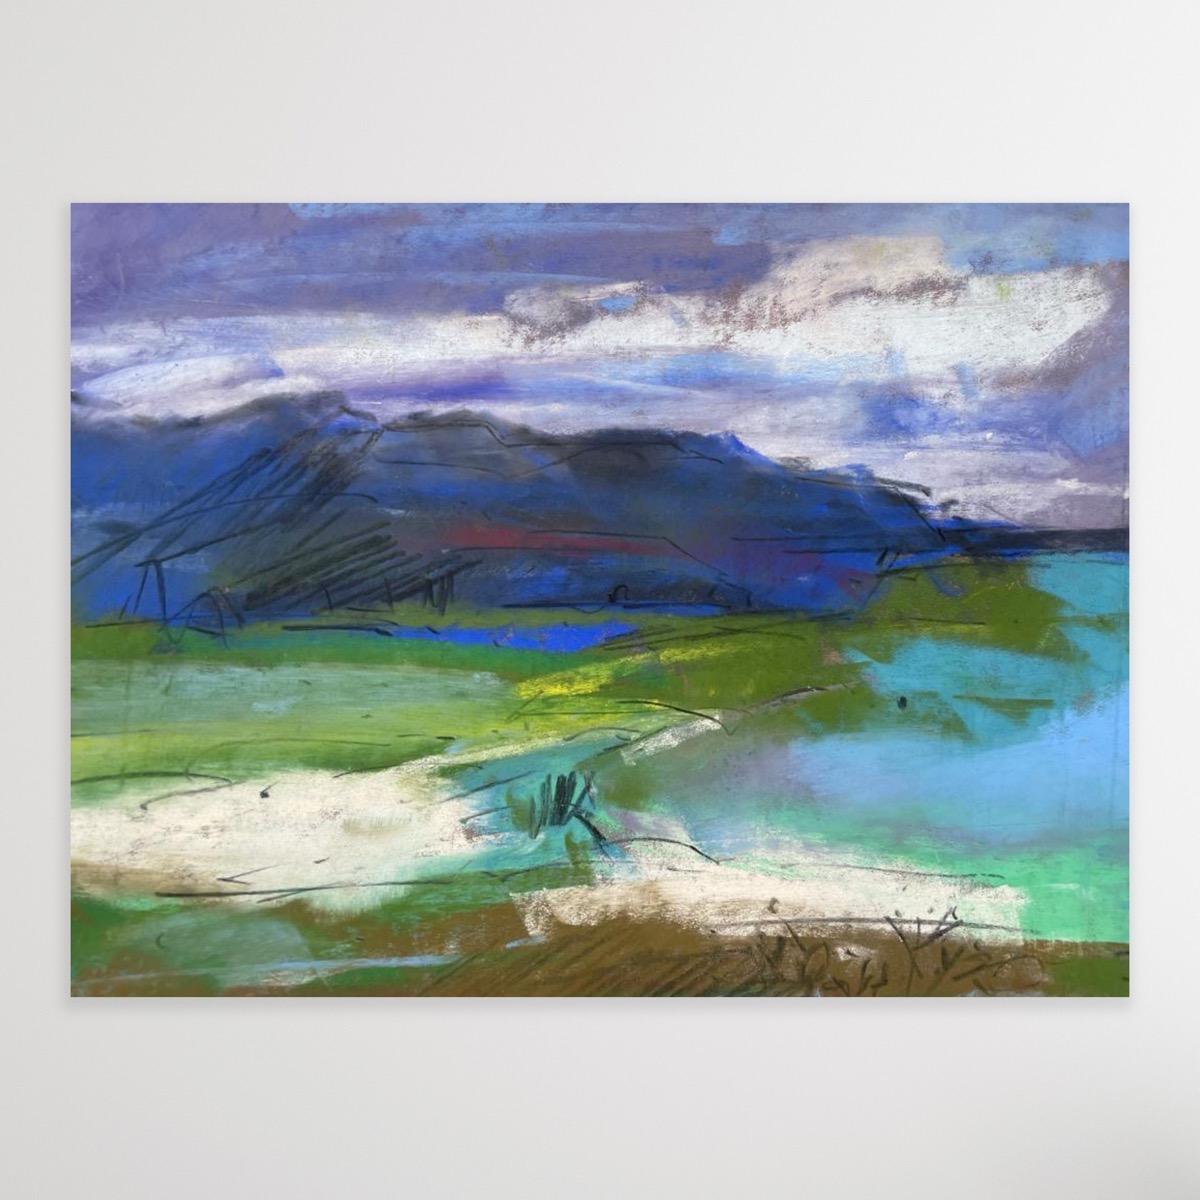 Loch Fyne, seascape, skyscape, Scotland, mountains, walking  - Painting by Natalie Bird